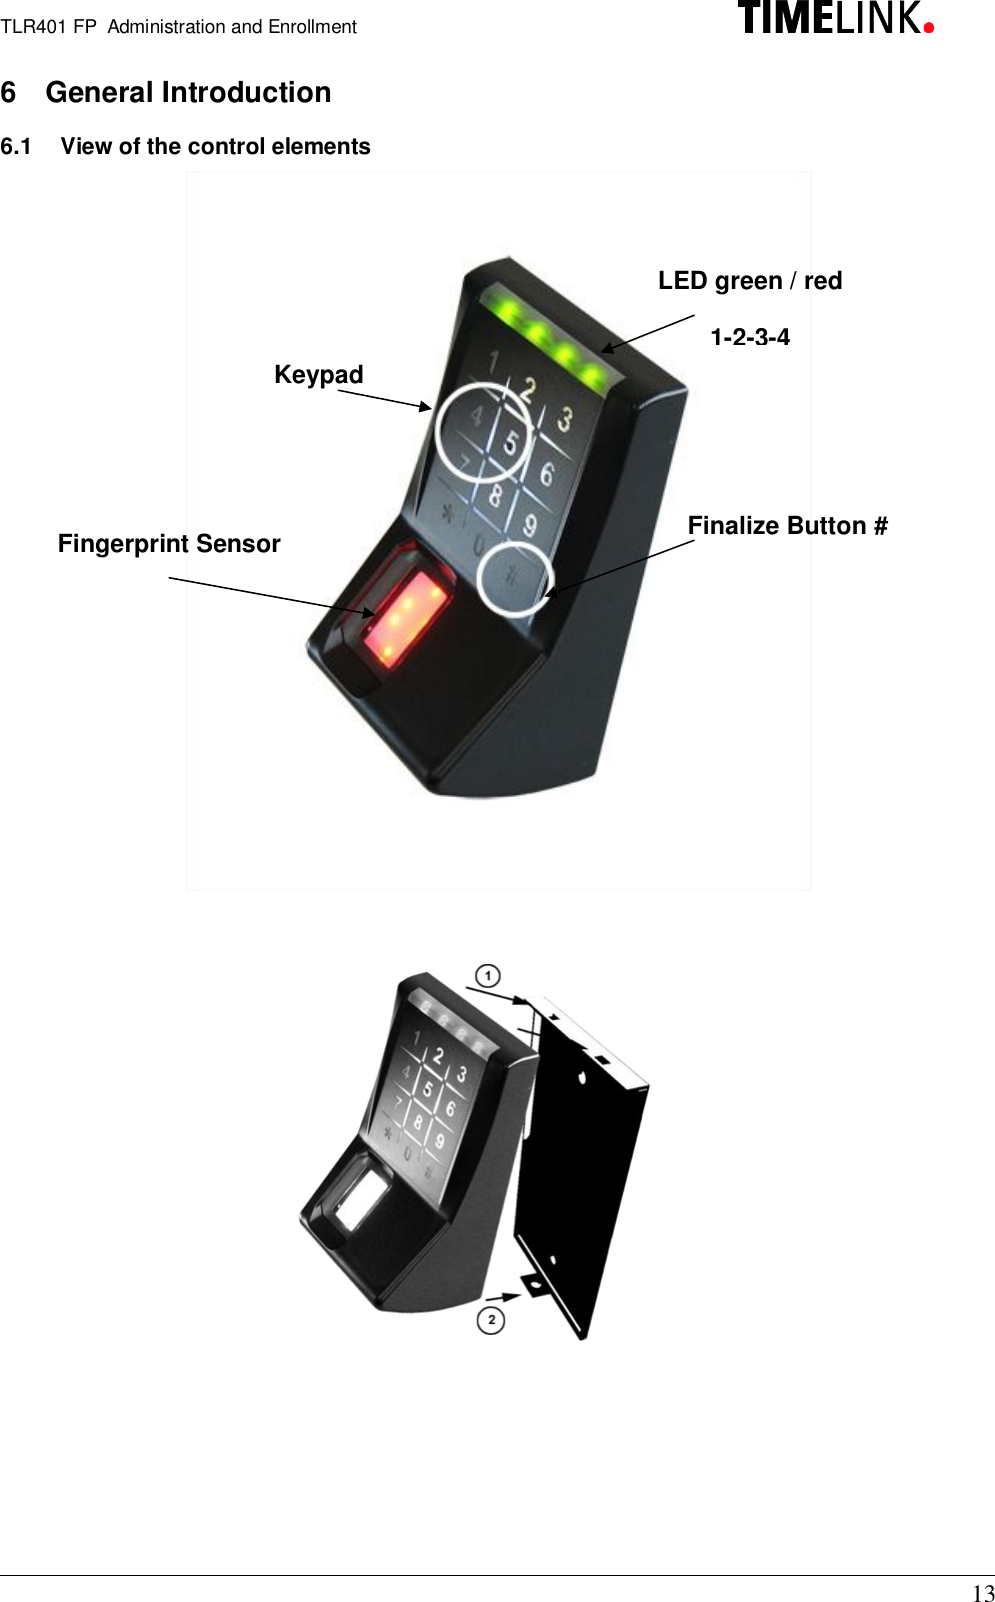 TLR401 FP  Administration and Enrollment136  General Introduction6.1  View of the control elementsLED green /red1-2-3-4Finalize Button #Fingerprint SensorKeypad